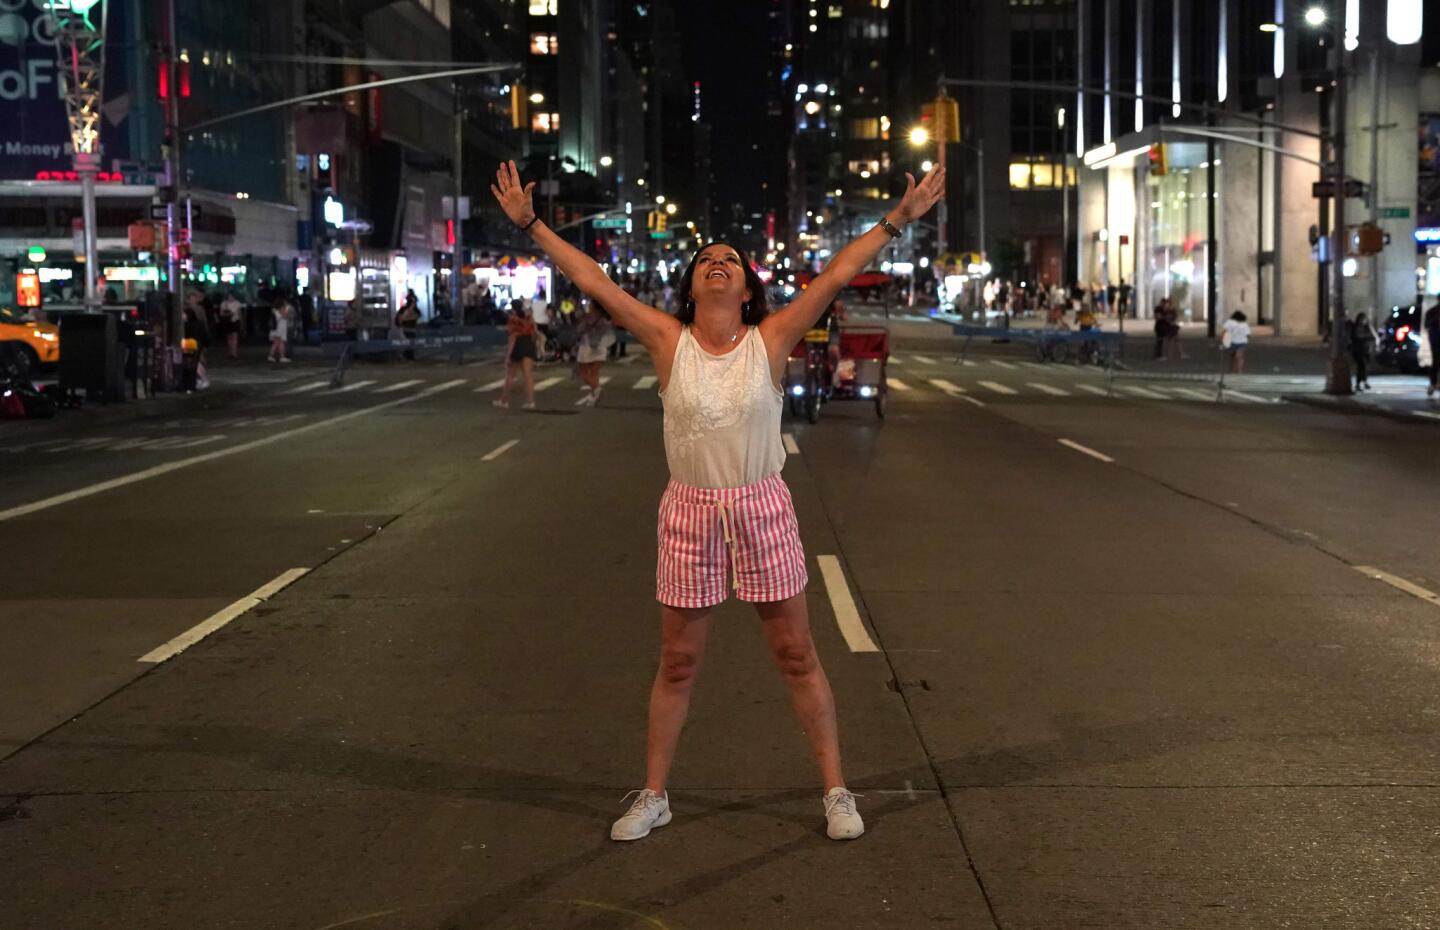 Catalina Soler of Spain celebrates after the lights come back on in Manhattan.